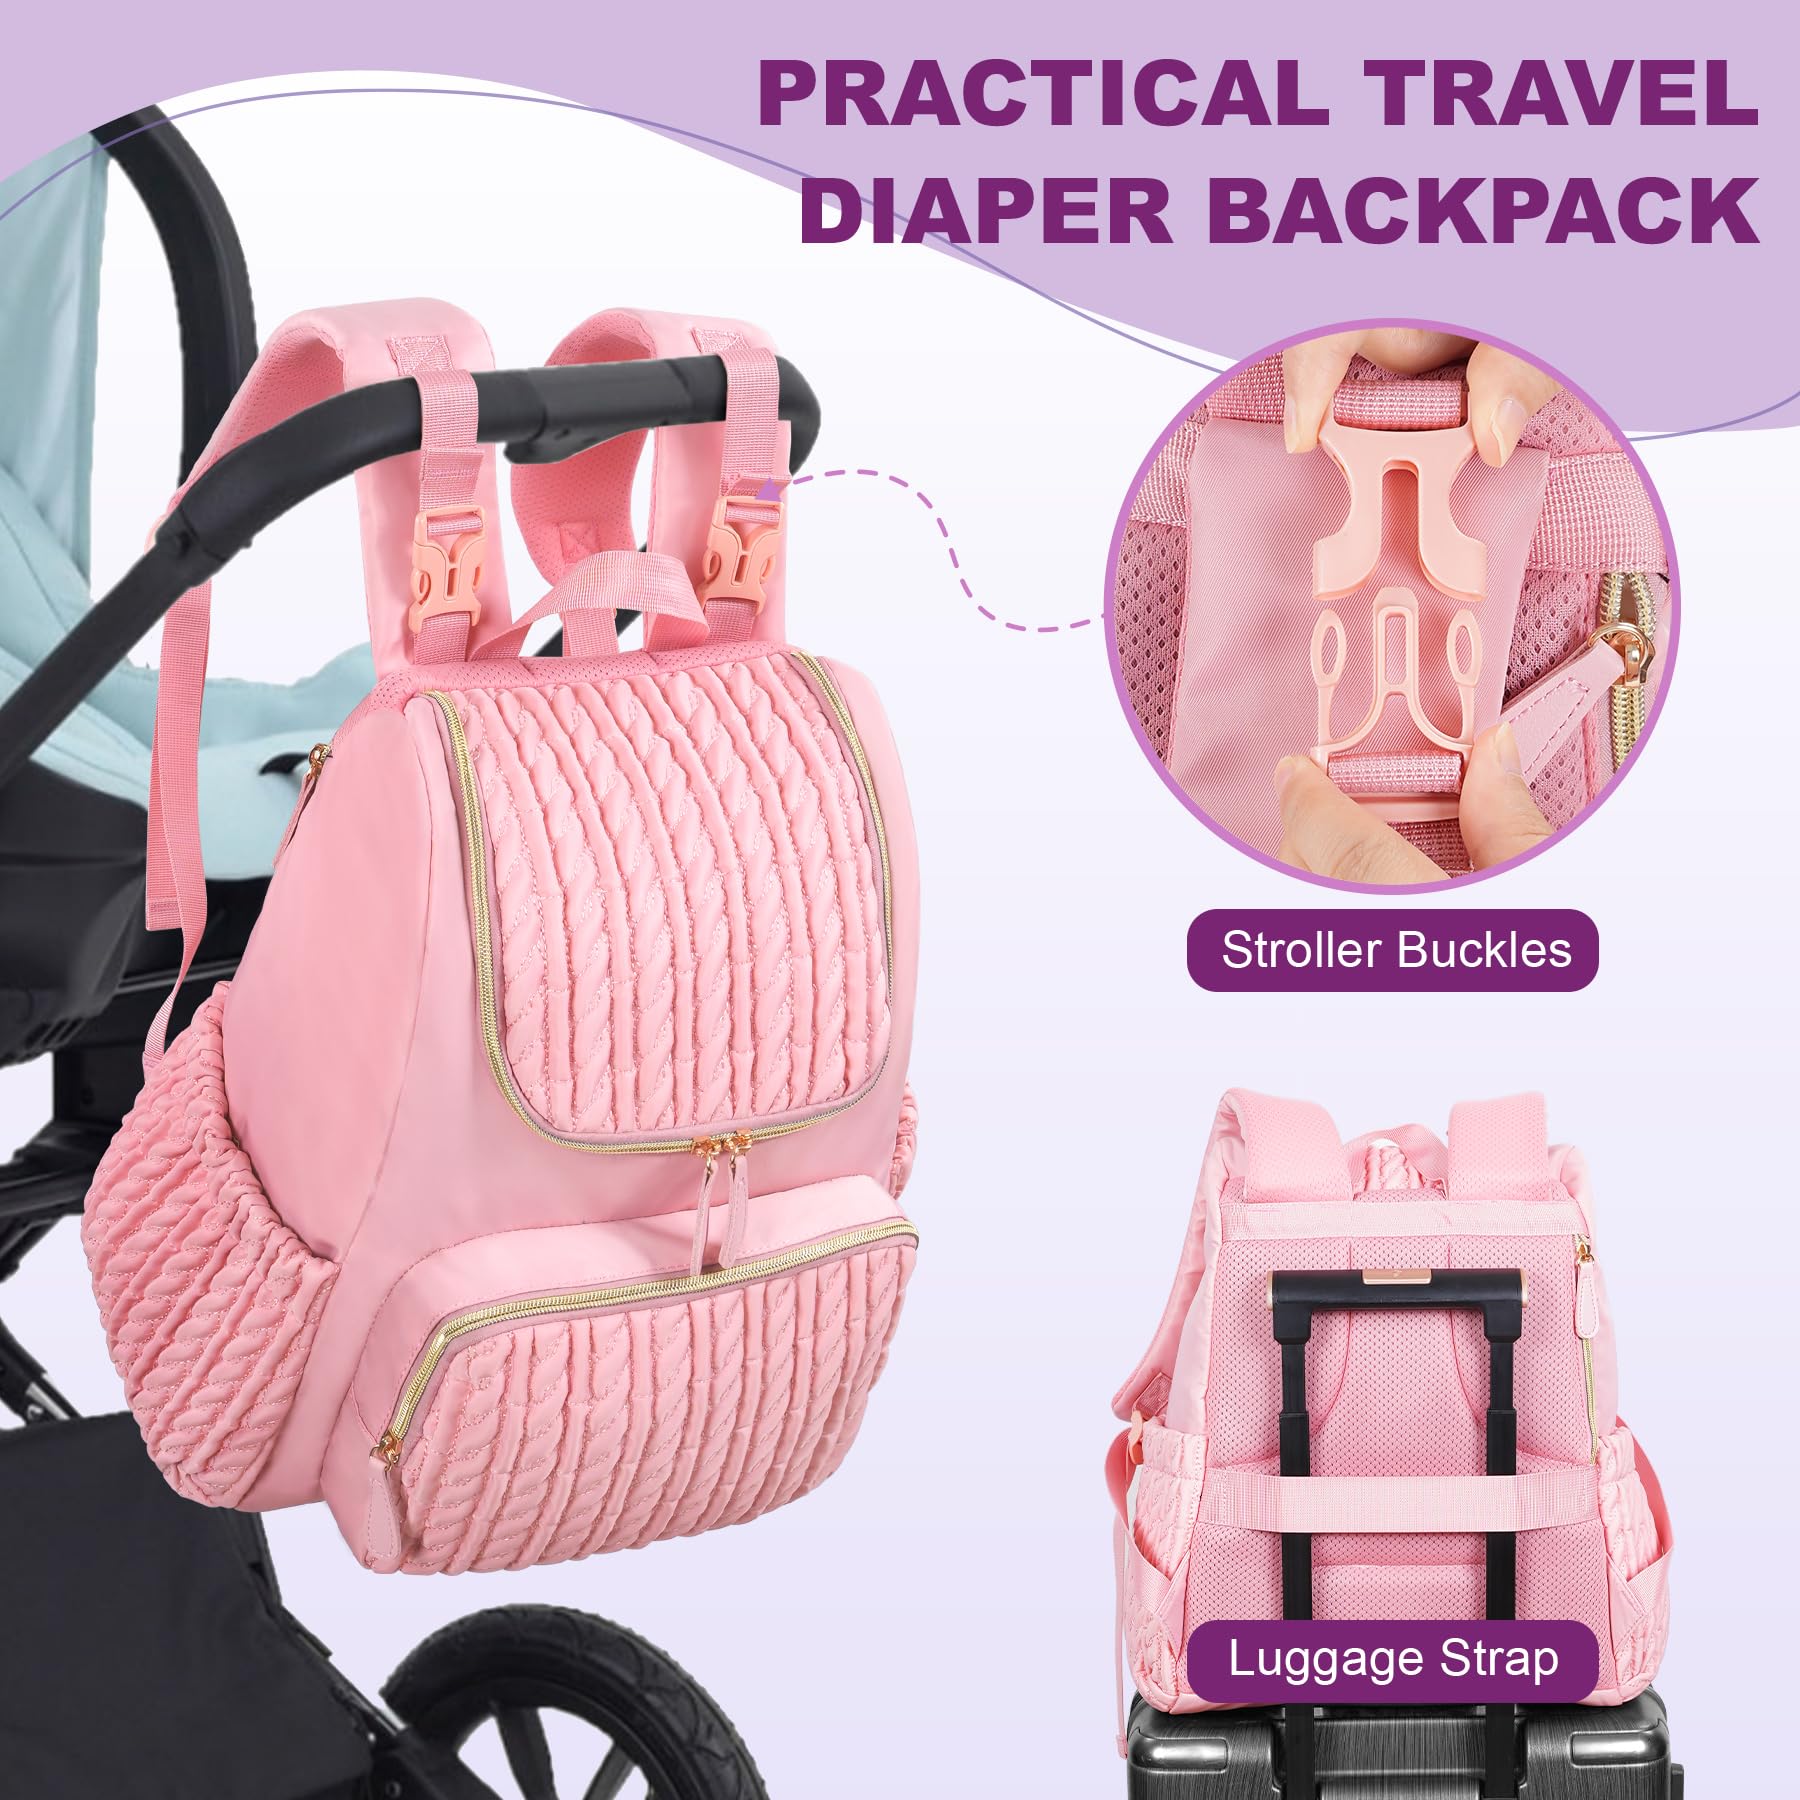 AIMSEAL Large Diaper Bag Backpack with Changing Pad, Stroller Buckles, Insulated Bottle Pockets & Padded Straps, Pink Travel Diaper Bags for Mom Boy Girl, Waterproof, Lightweight, Baby Gift Registry